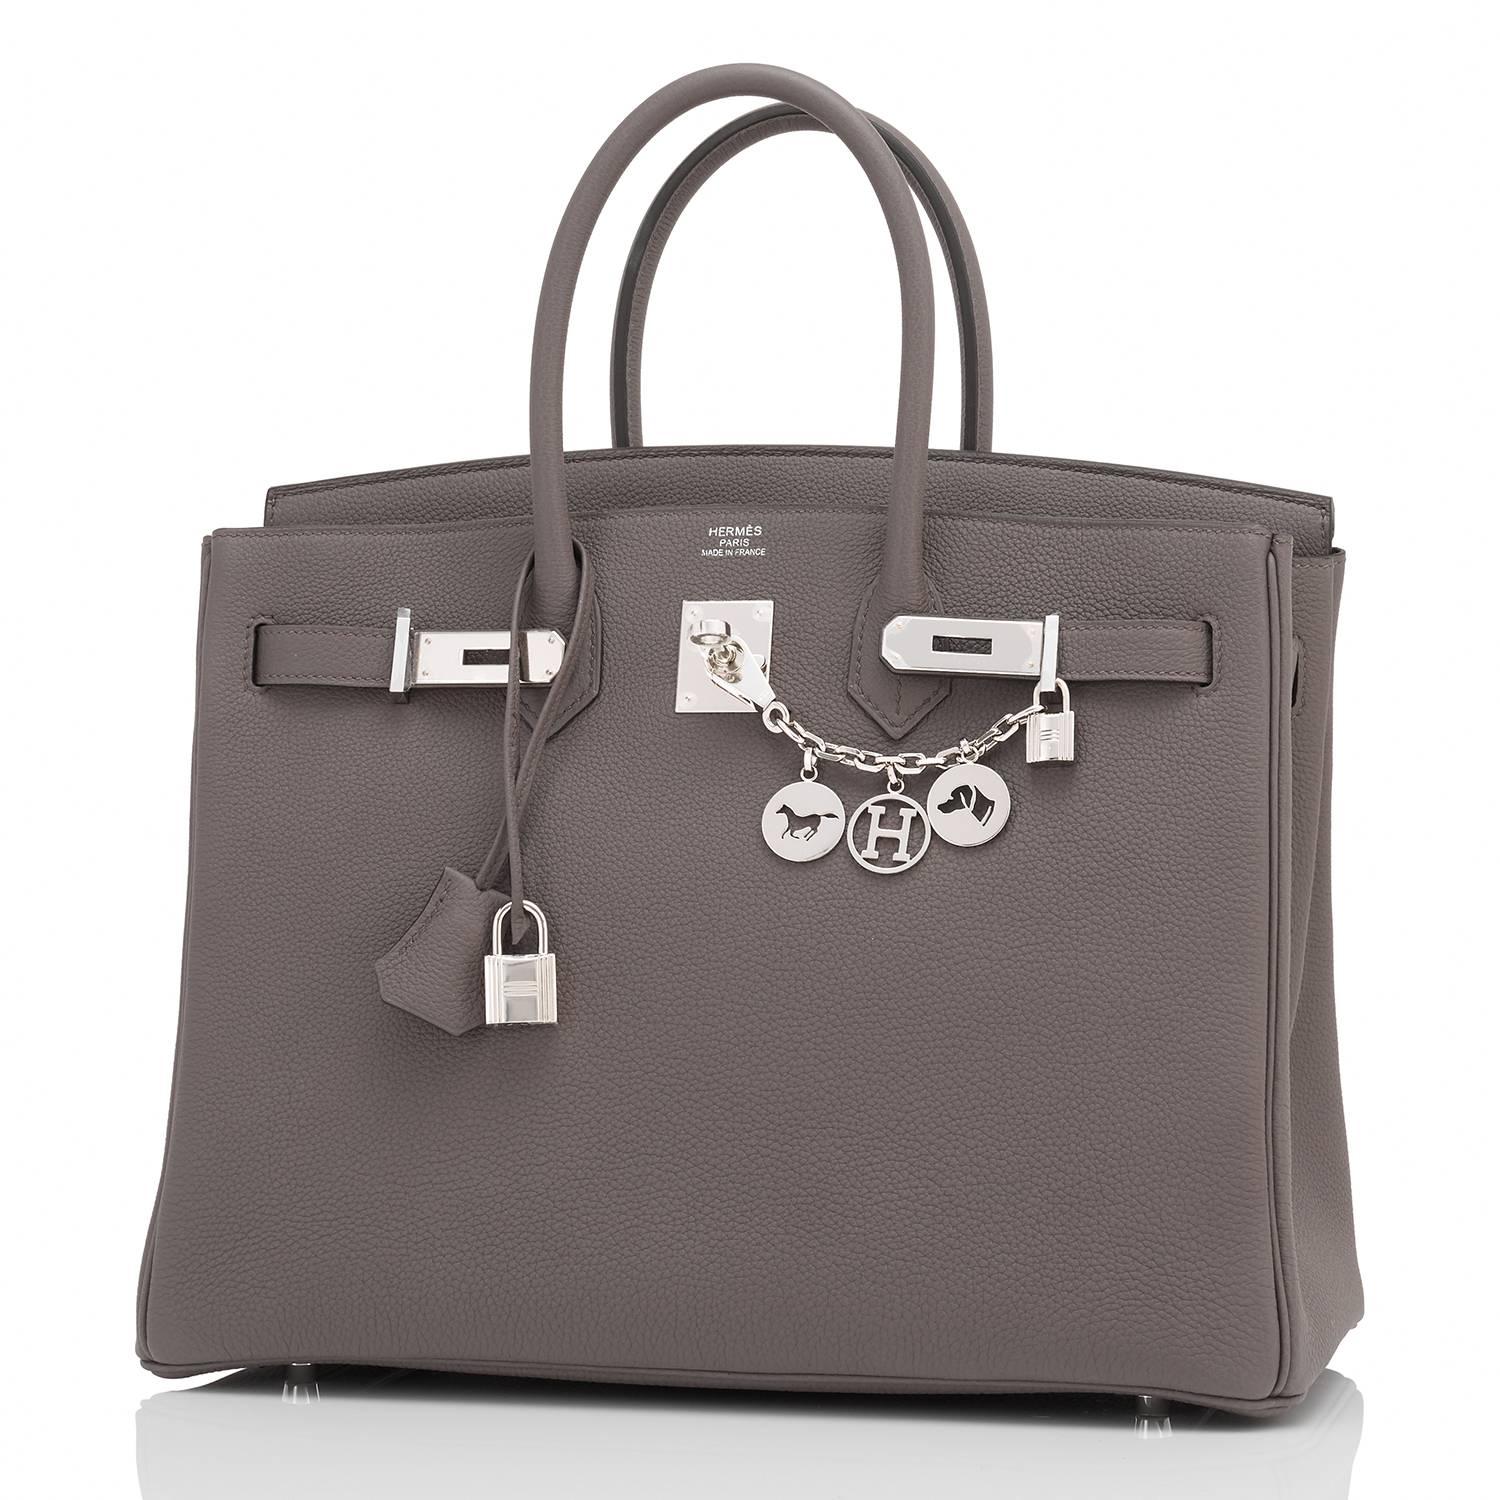 Hermes Etain Togo 35cm Birkin Palladium Hardware
Brand New in Box. Store Fresh. Pristine condition (with plastic on hardware).
Perfect gift! Comes with keys, lock, clochette, a sleeper for the bag, rain protector, and orange Hermes box.
Etain